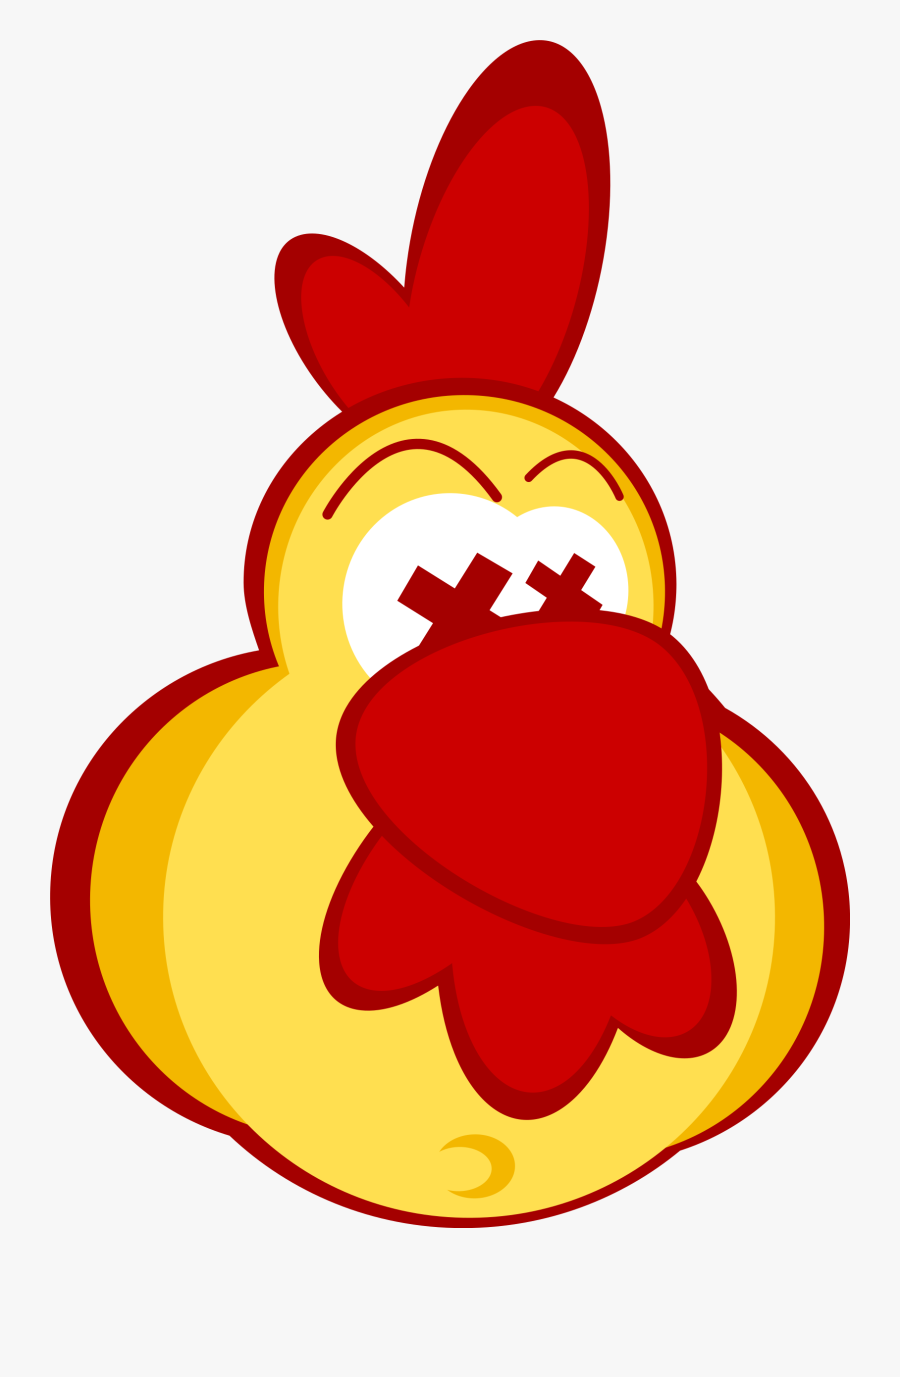 Chicken Clipart With Crazy Eyes - Dead Chicken Png, Transparent Clipart